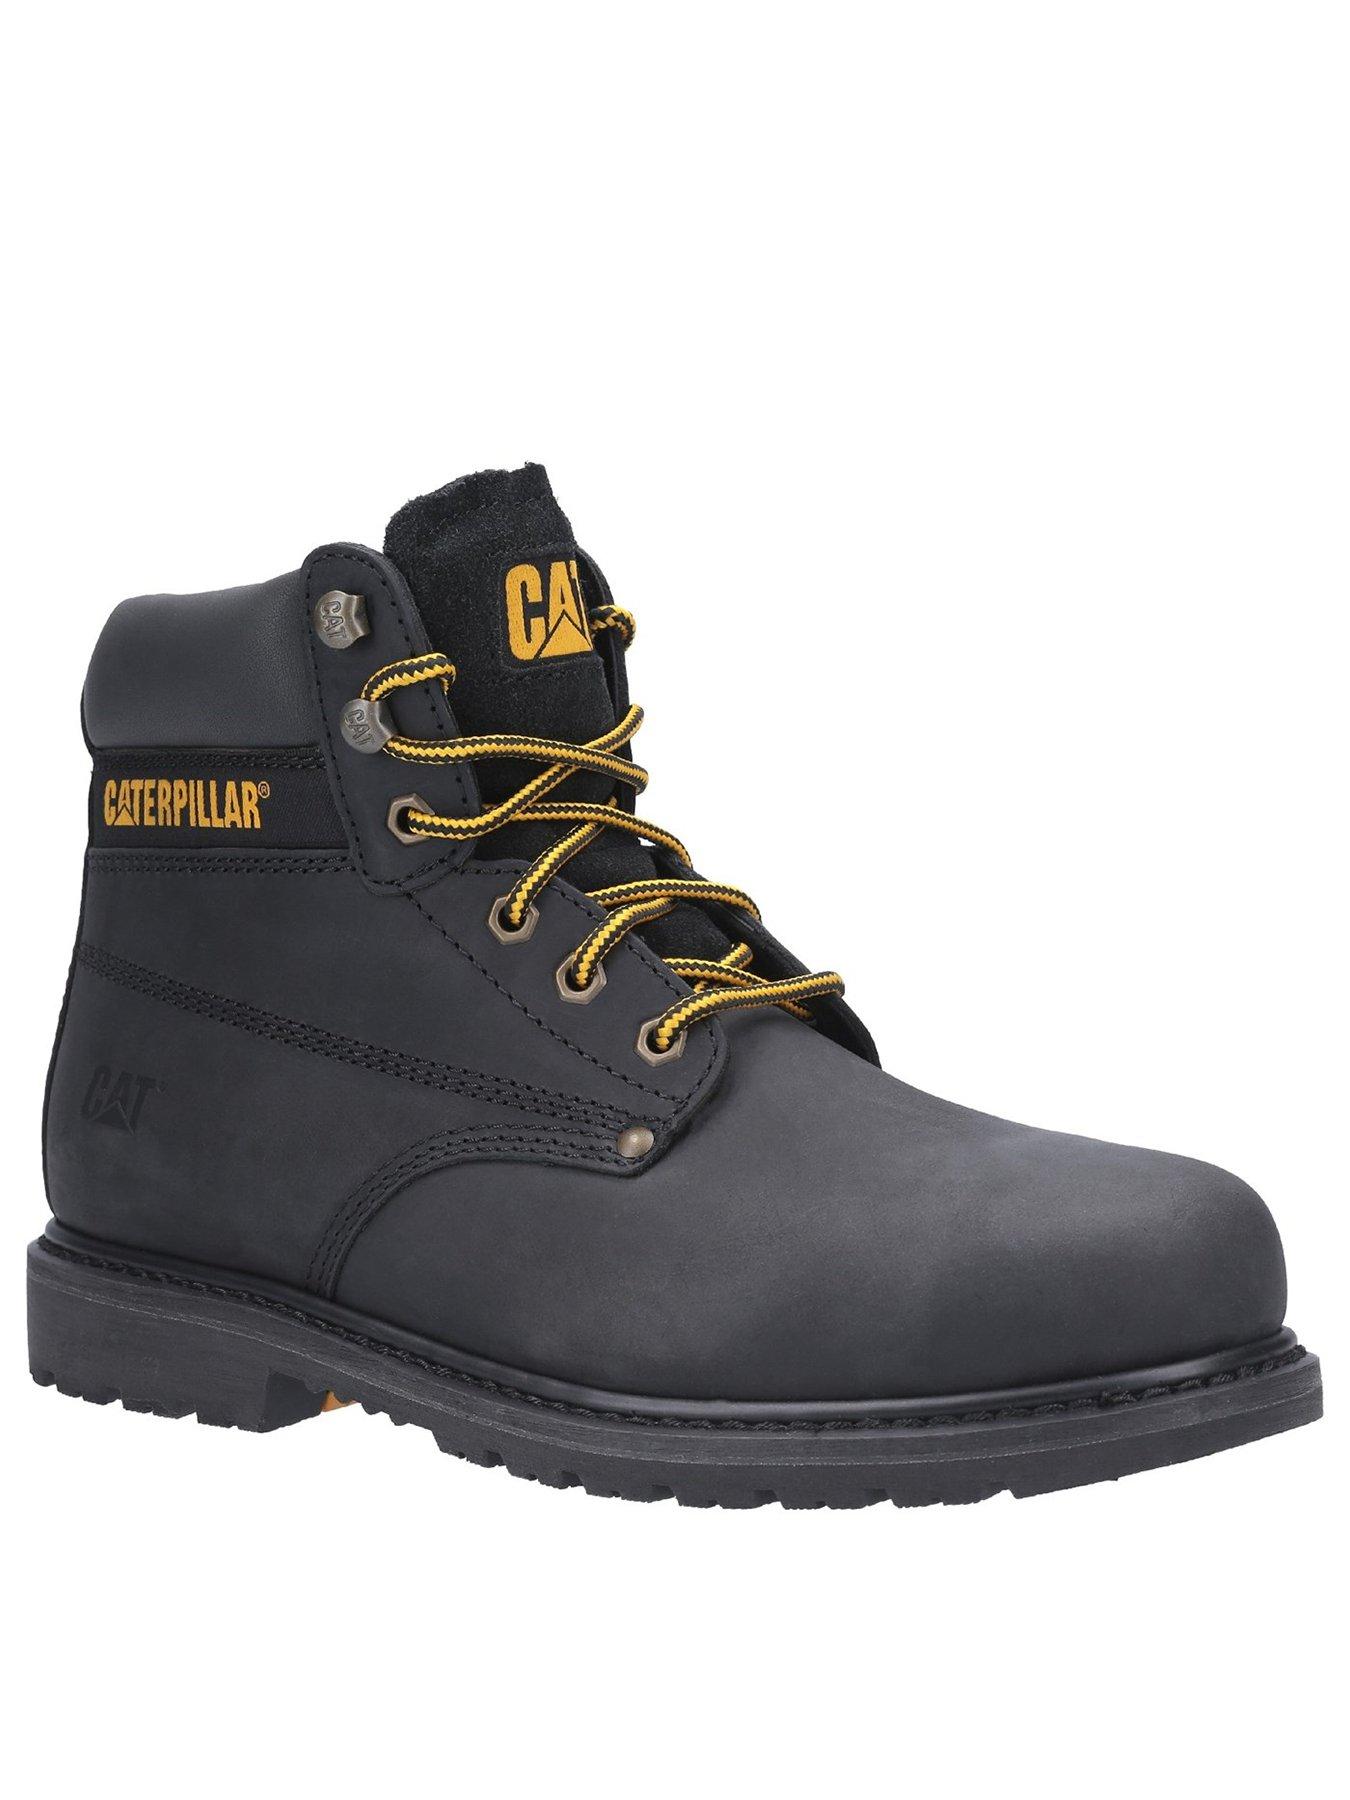 Shoes & boots Powerplant Boots - Black